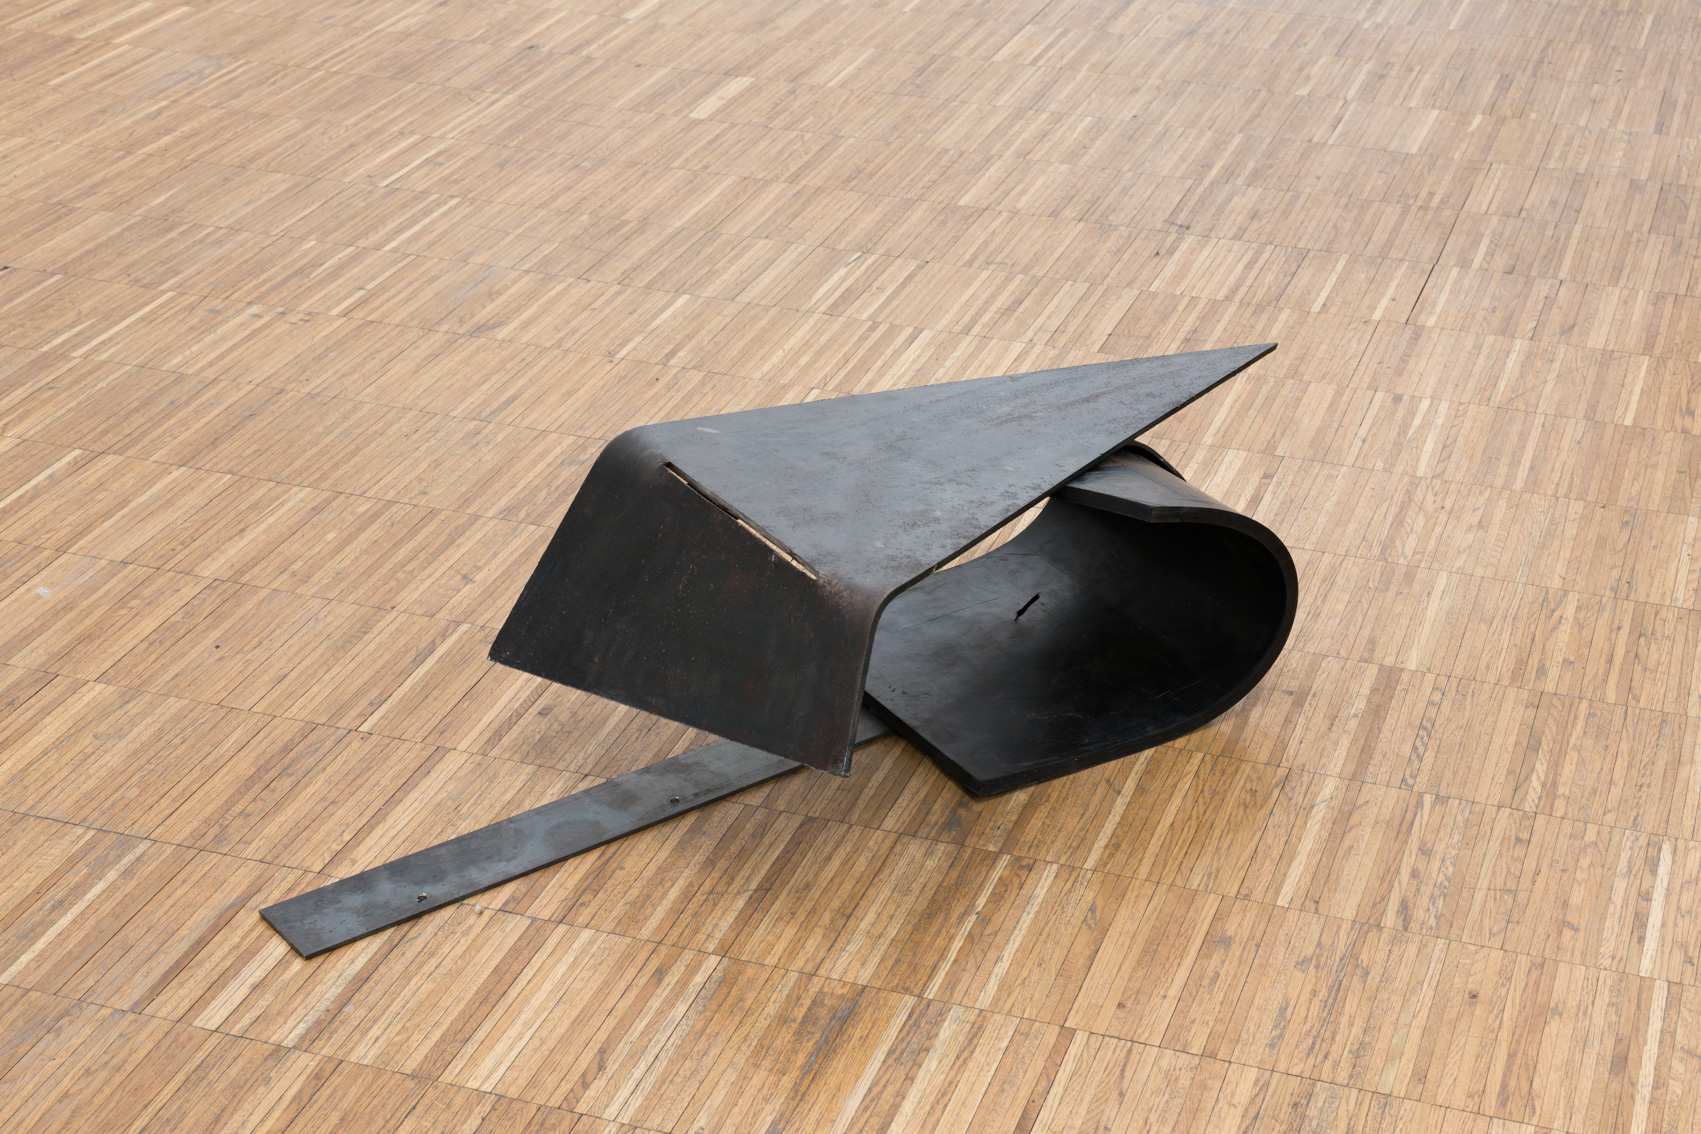 Thea Moeller, Ginster#2, 2021, steel, rubber, 25 x 35 x 60 cm, courtesy of the artist and Wonnerth Dejaco, Vienna